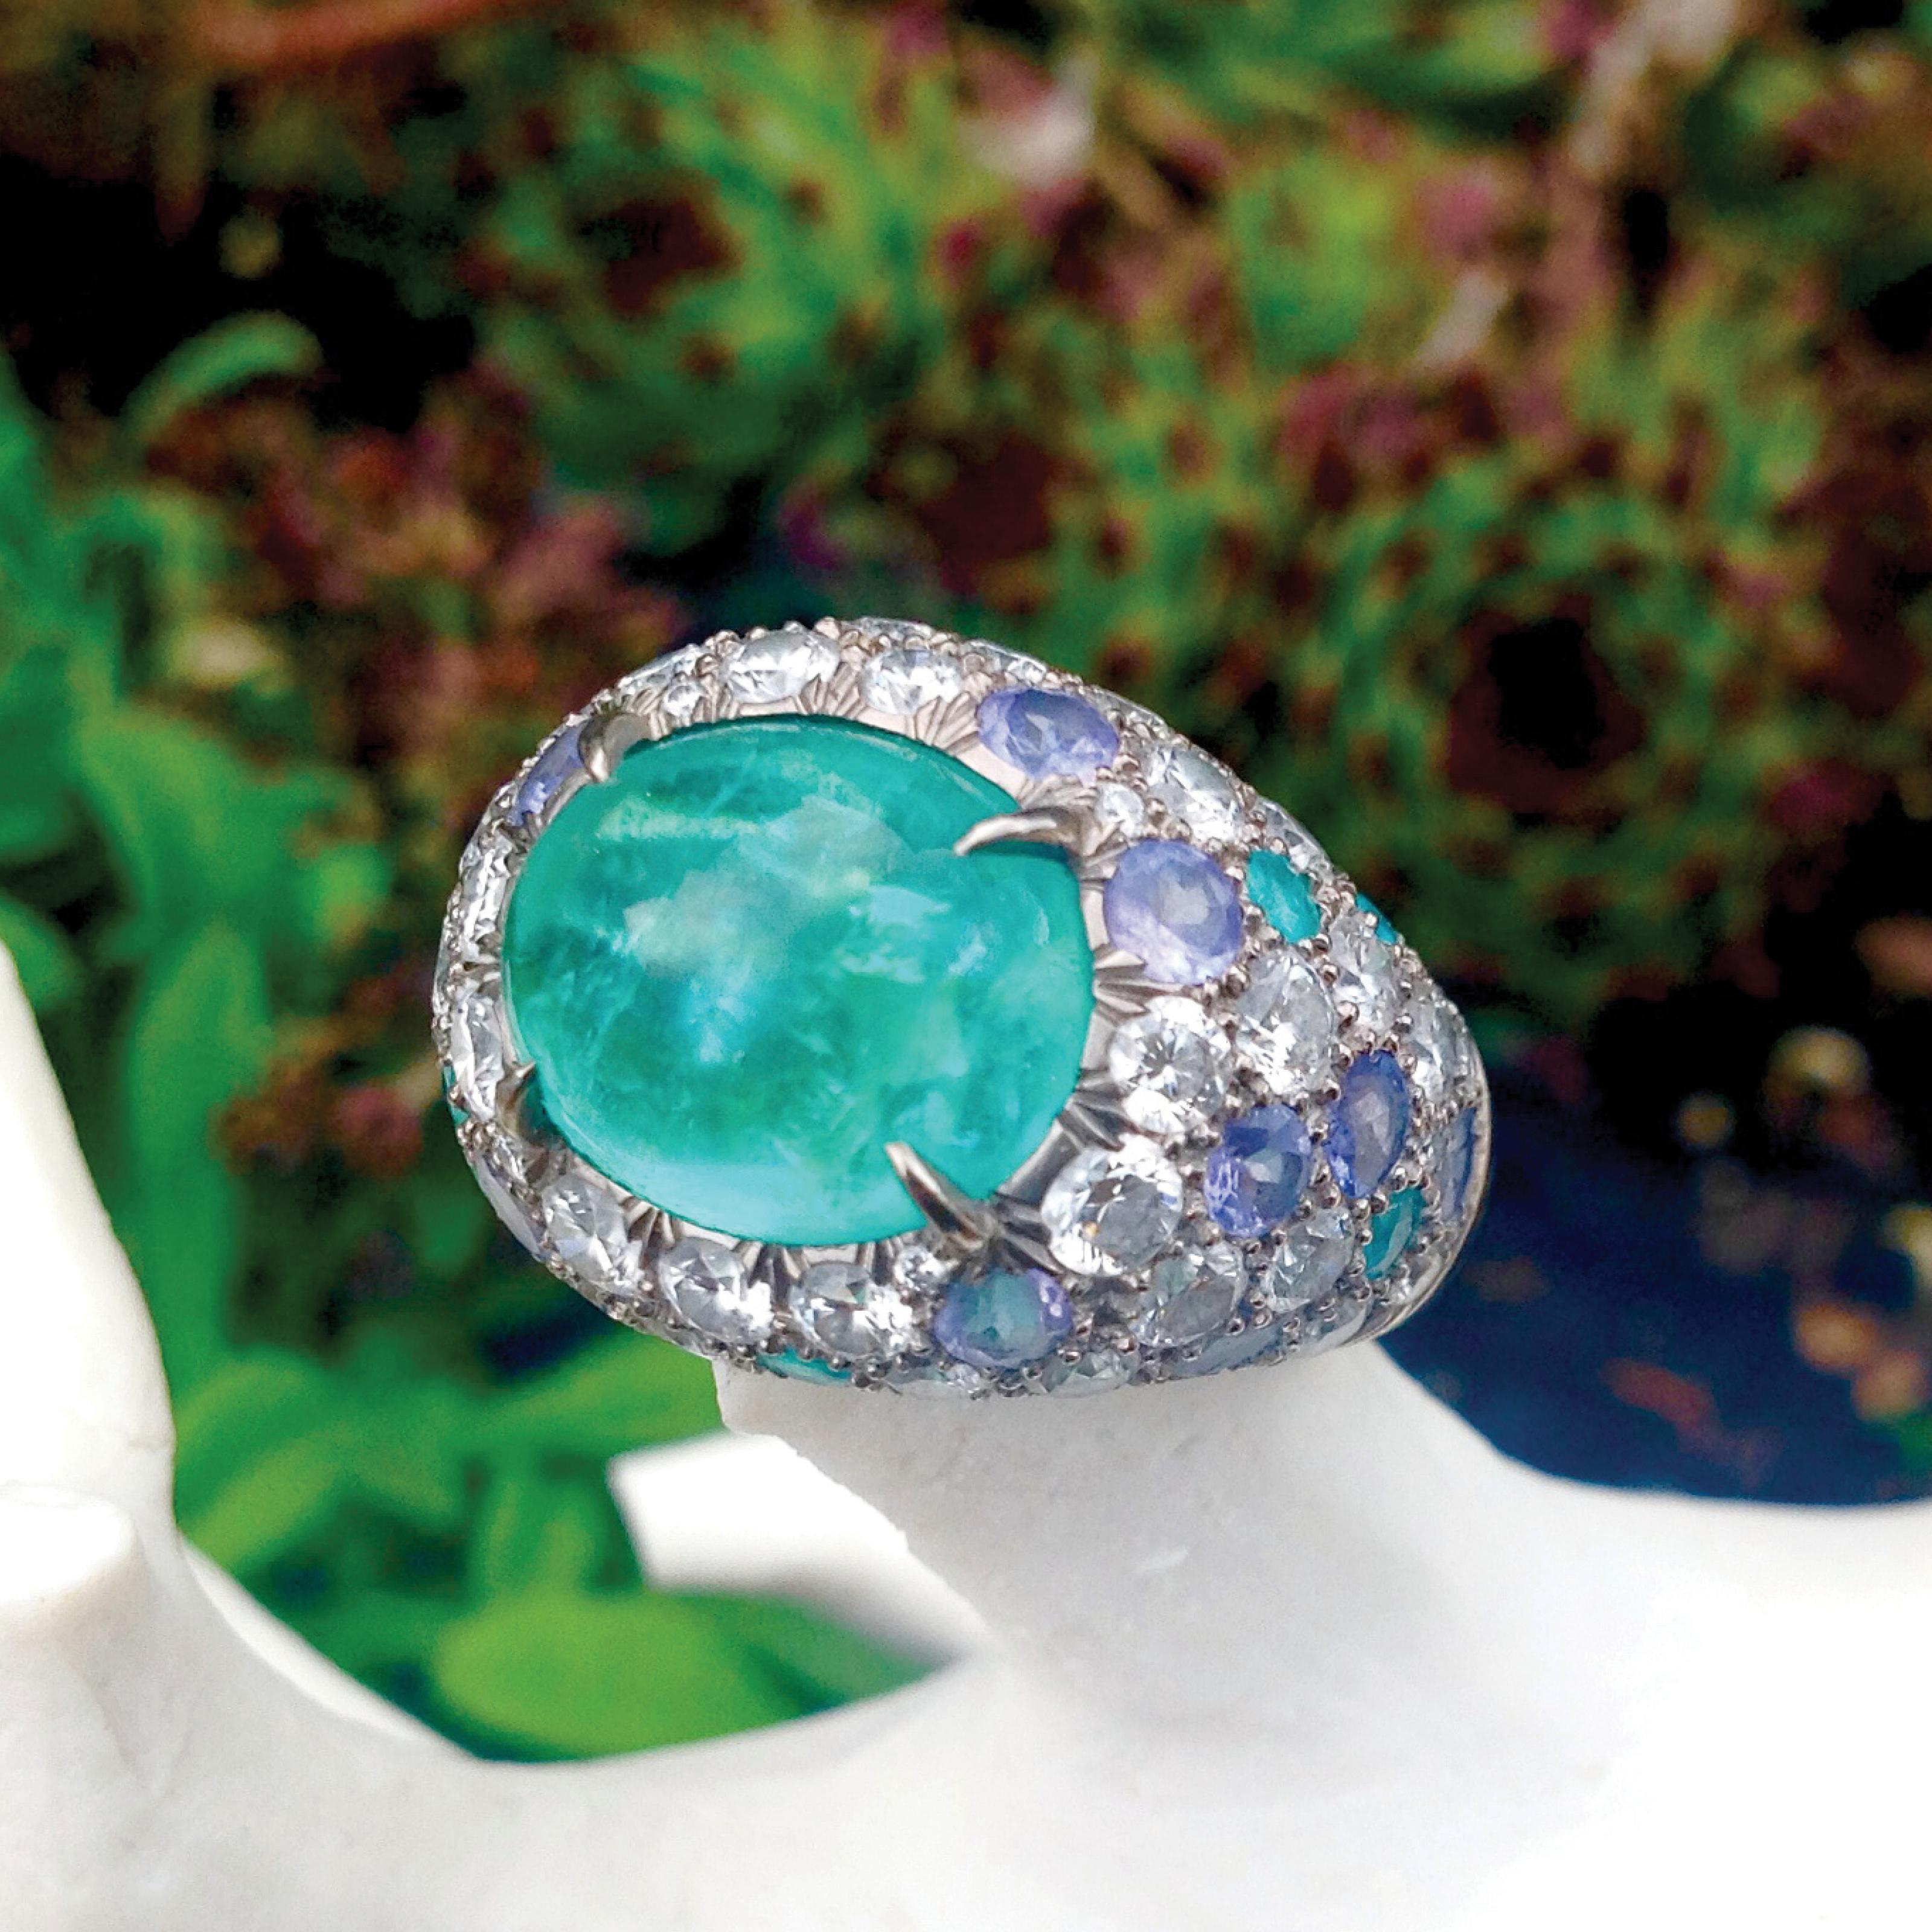 The radiance of this Cabochon Cut Paraiba Tourmaline, from Mozambique, are showcased by more Paraiba Tourmalines as well as Diamonds and Blue Sapphires from Brazil.

Paraiba Tourmaline 5.9 Carat, 11.76mm x 9.53mm

In the Band: Diamonds 2.25 Carat,